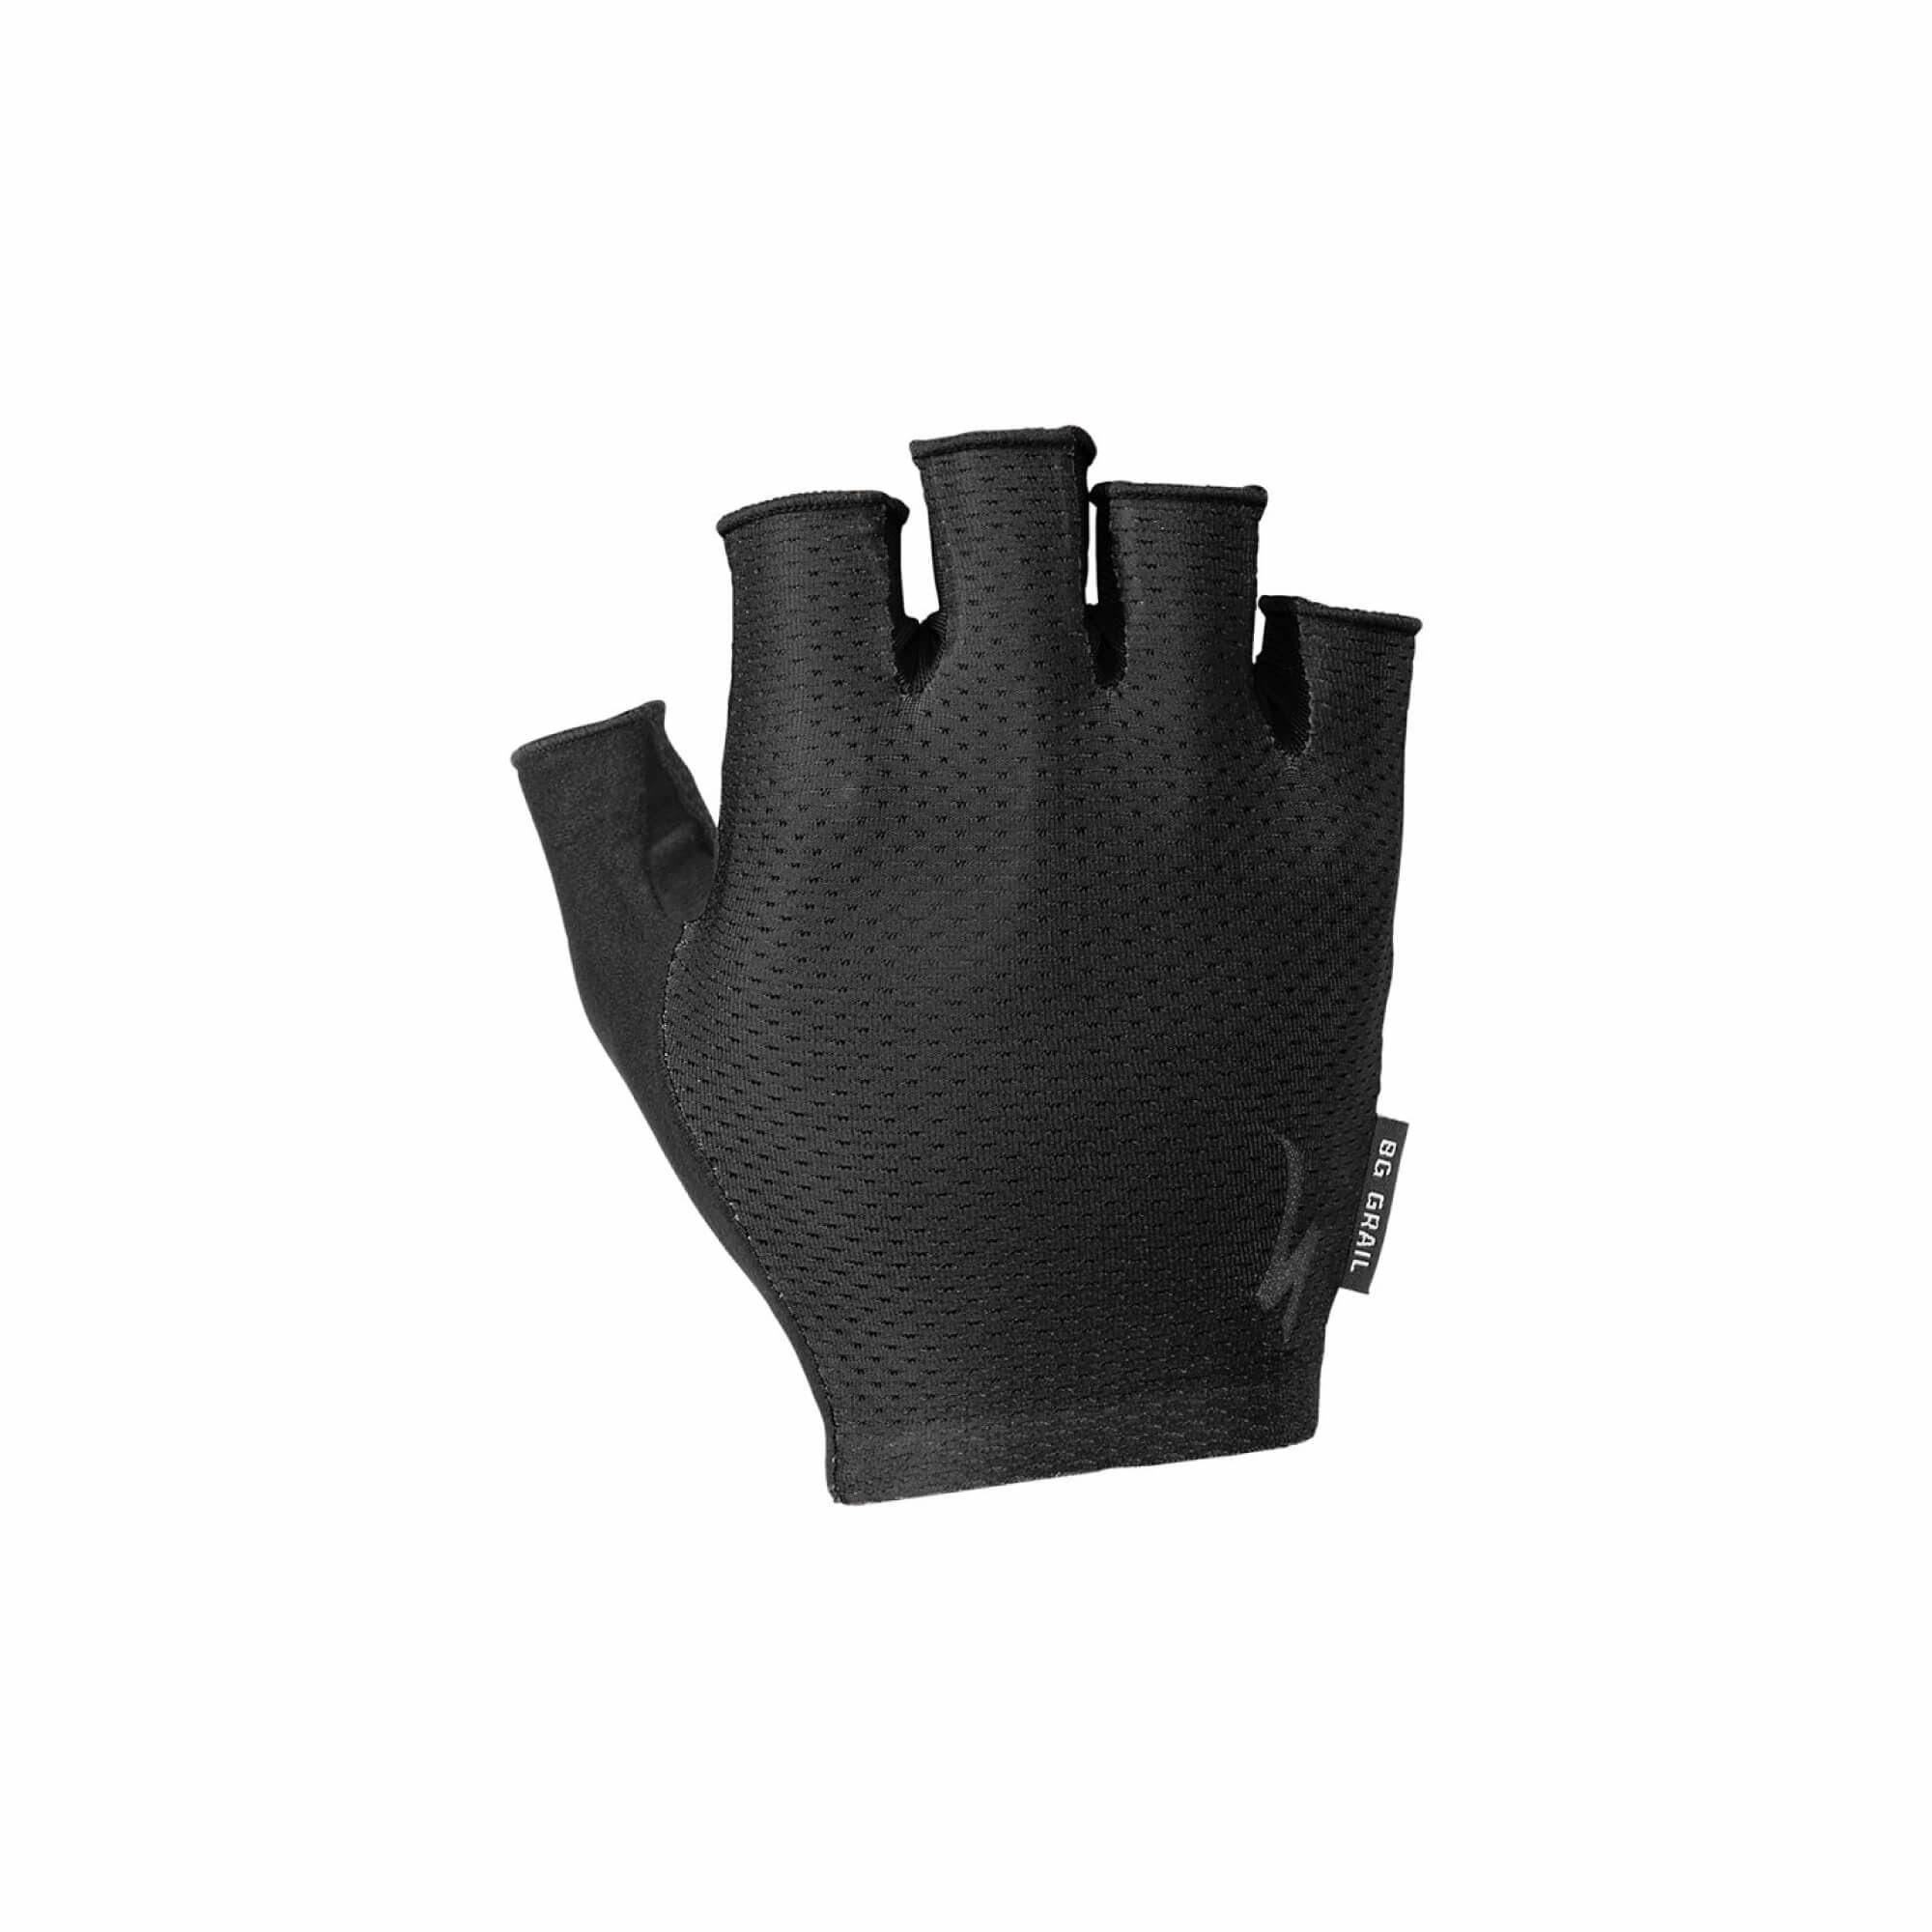 Specialized Body Geometry Grail Gloves - Black/Size - Large